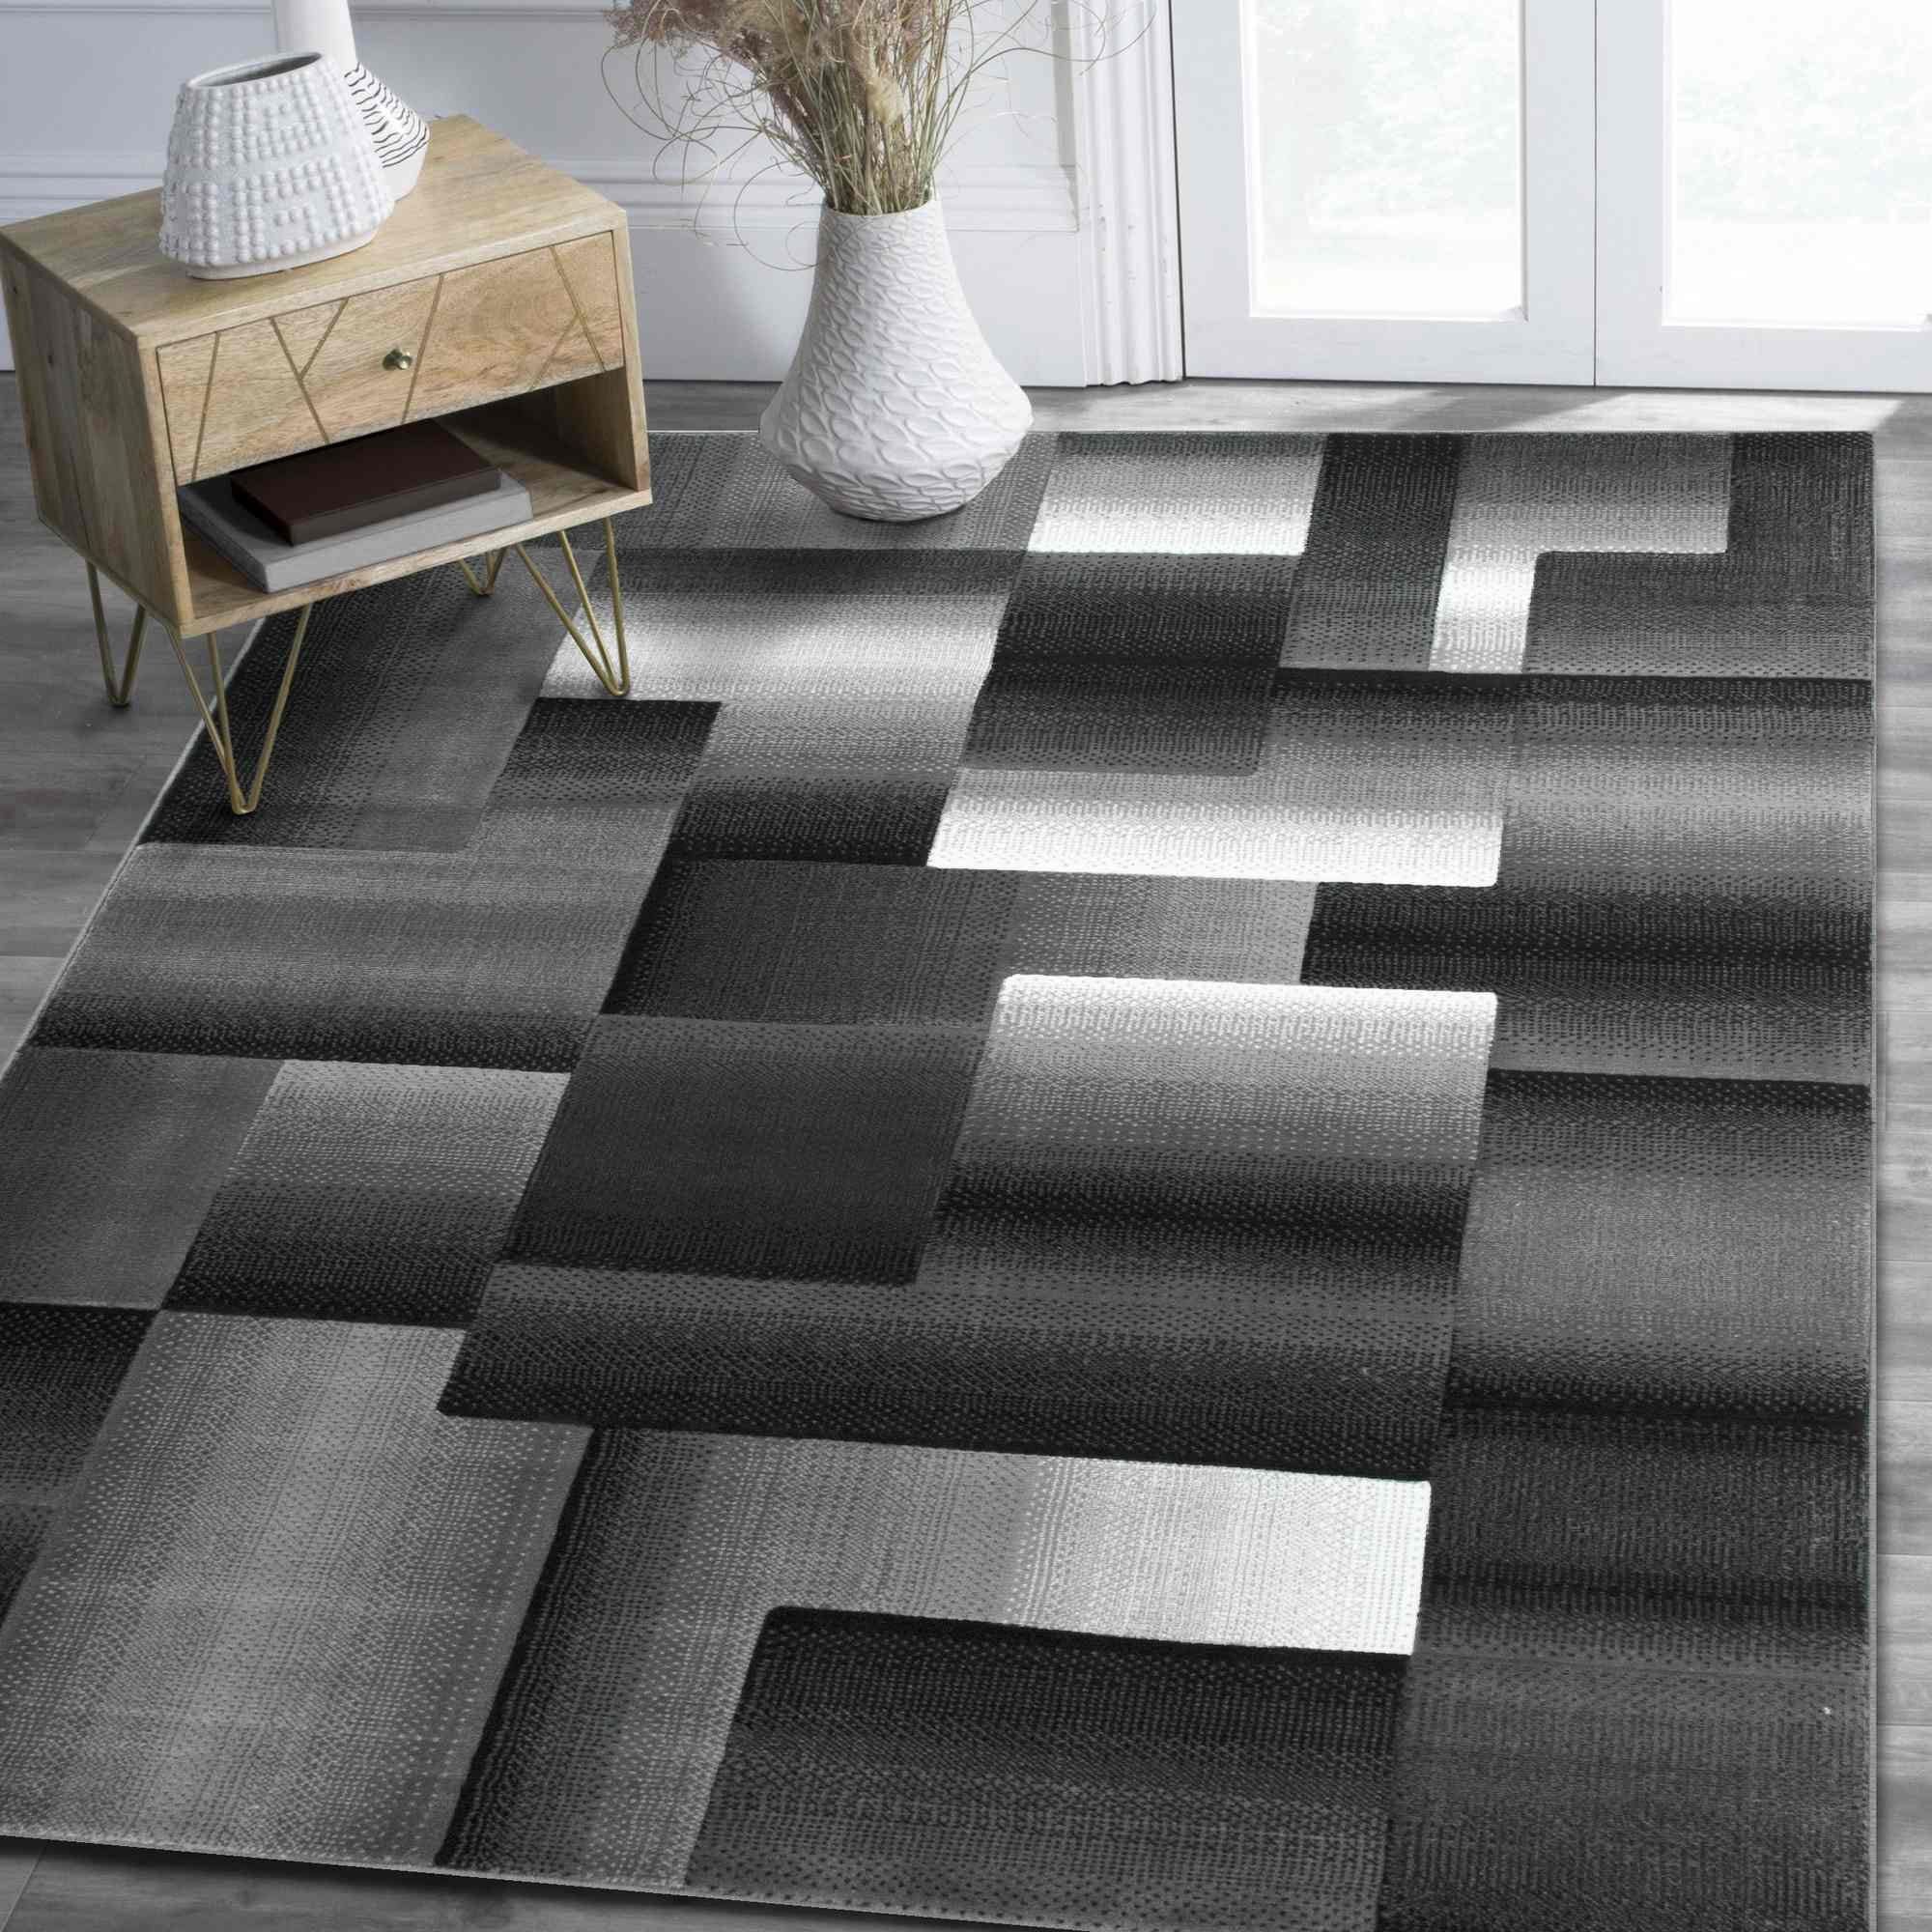 Grey/Silver/Black/Abstract Area Rug Modern Contemporary Geometric Cube And  Square Design Pattern Carpet – Walmart Throughout Modern Square Rugs (View 3 of 15)